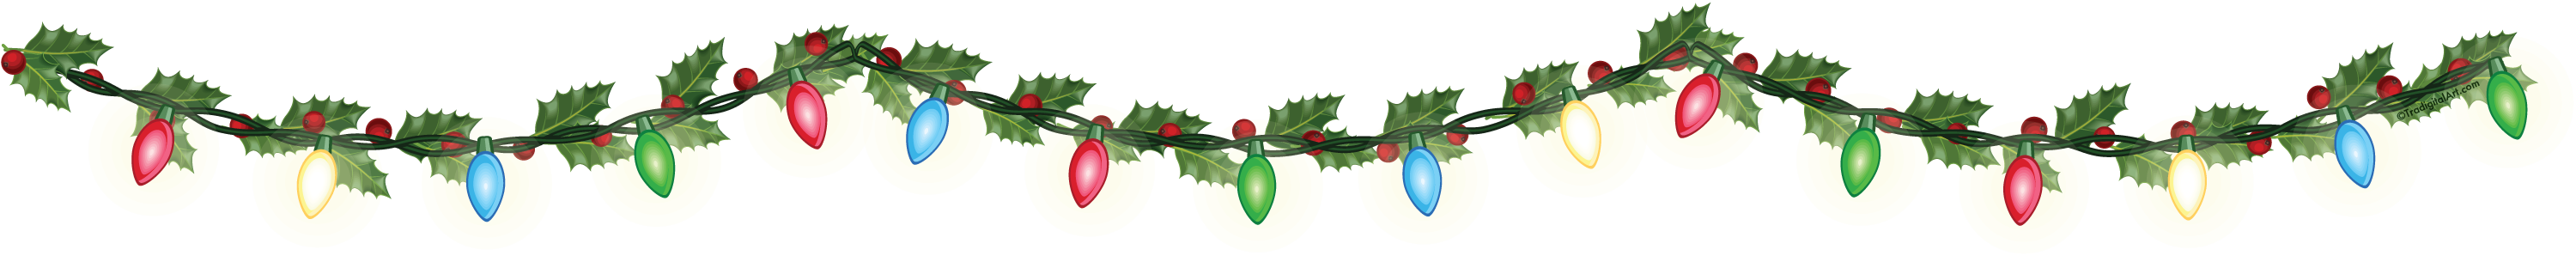 Download Free Christmas Lights Png Transparent Images Download Free Clip Art Free Clip Art On Clipart Library Yellowimages Mockups